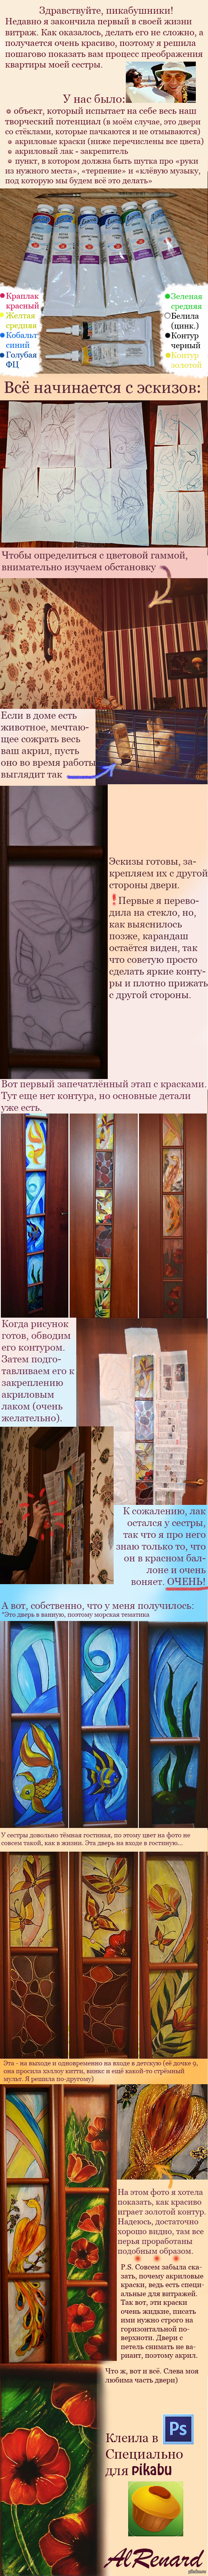 Little stained glass dilettantism - My, Drawing, Stained glass, Creation, Acrylic, Handmade, Door, My art, Longpost